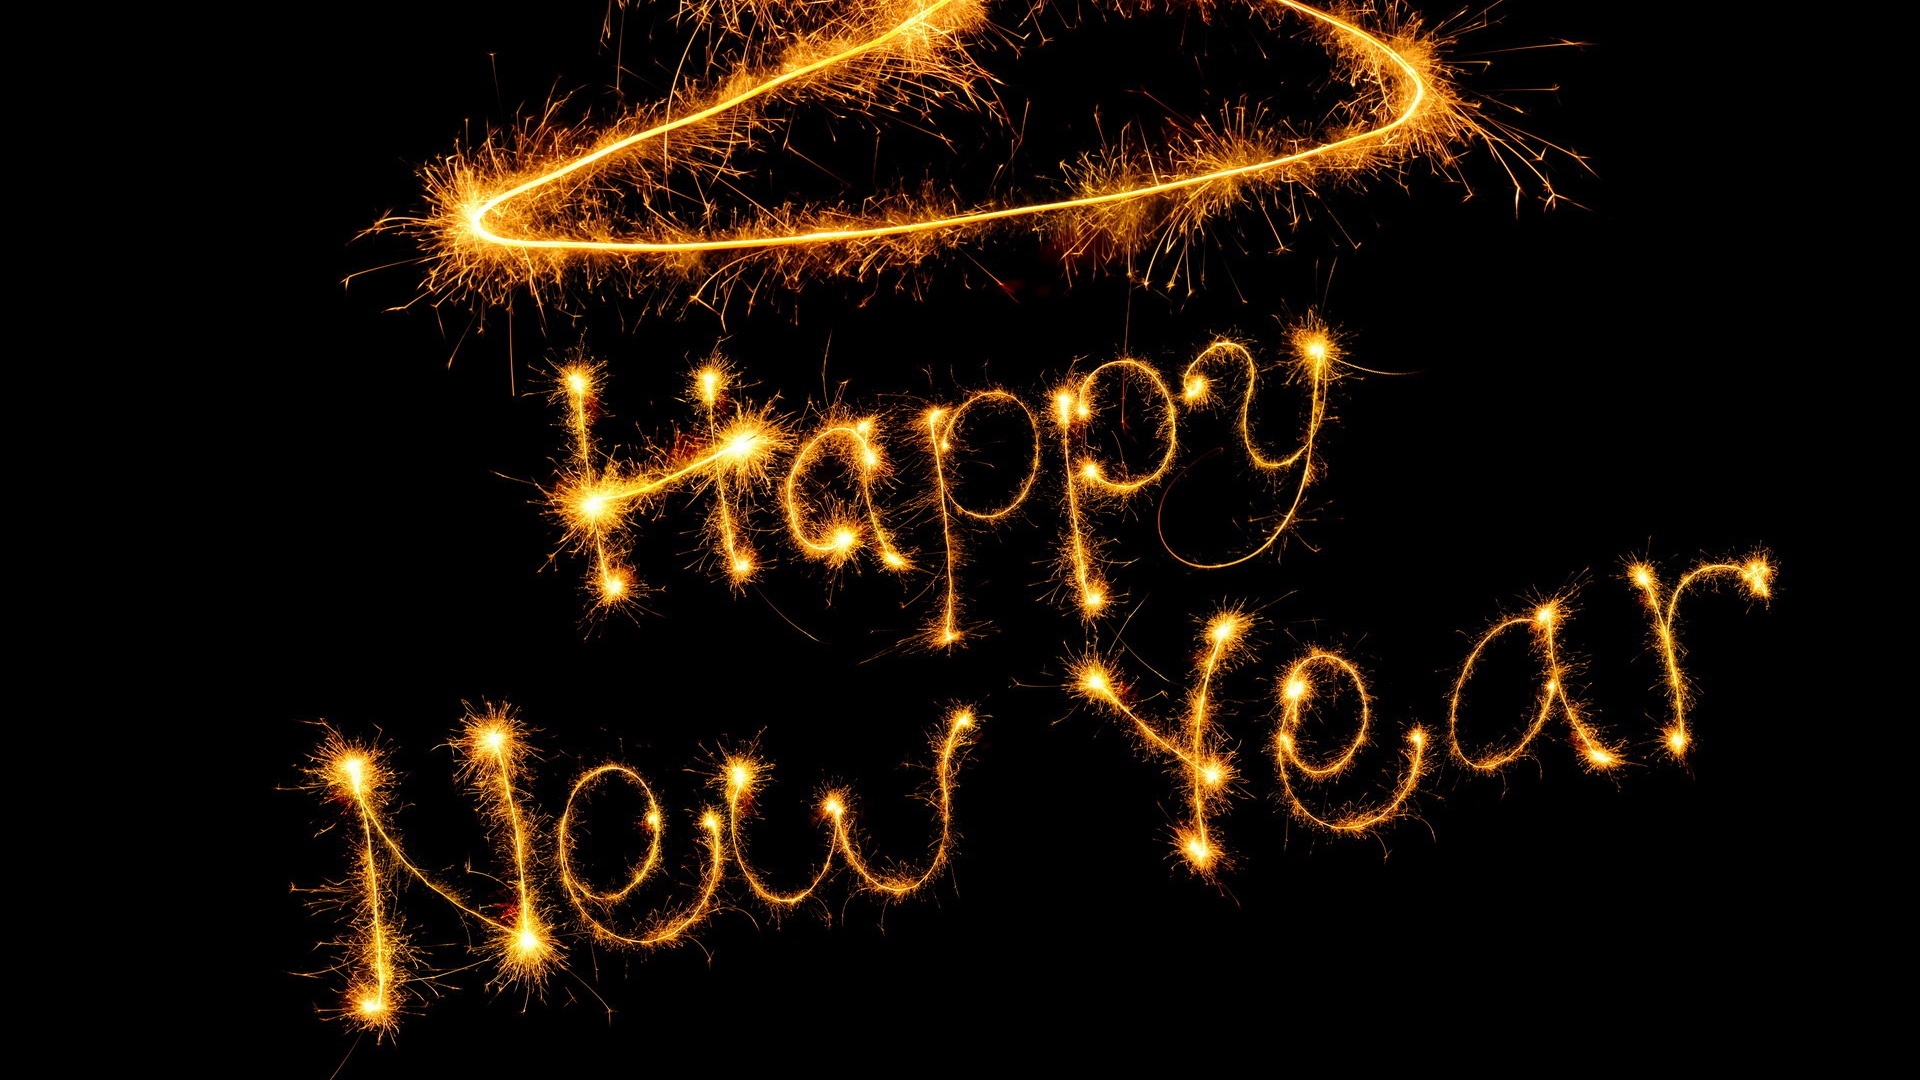 Beautiful Happy New Year 2014 HD Wallpaper Picture Image Free Download